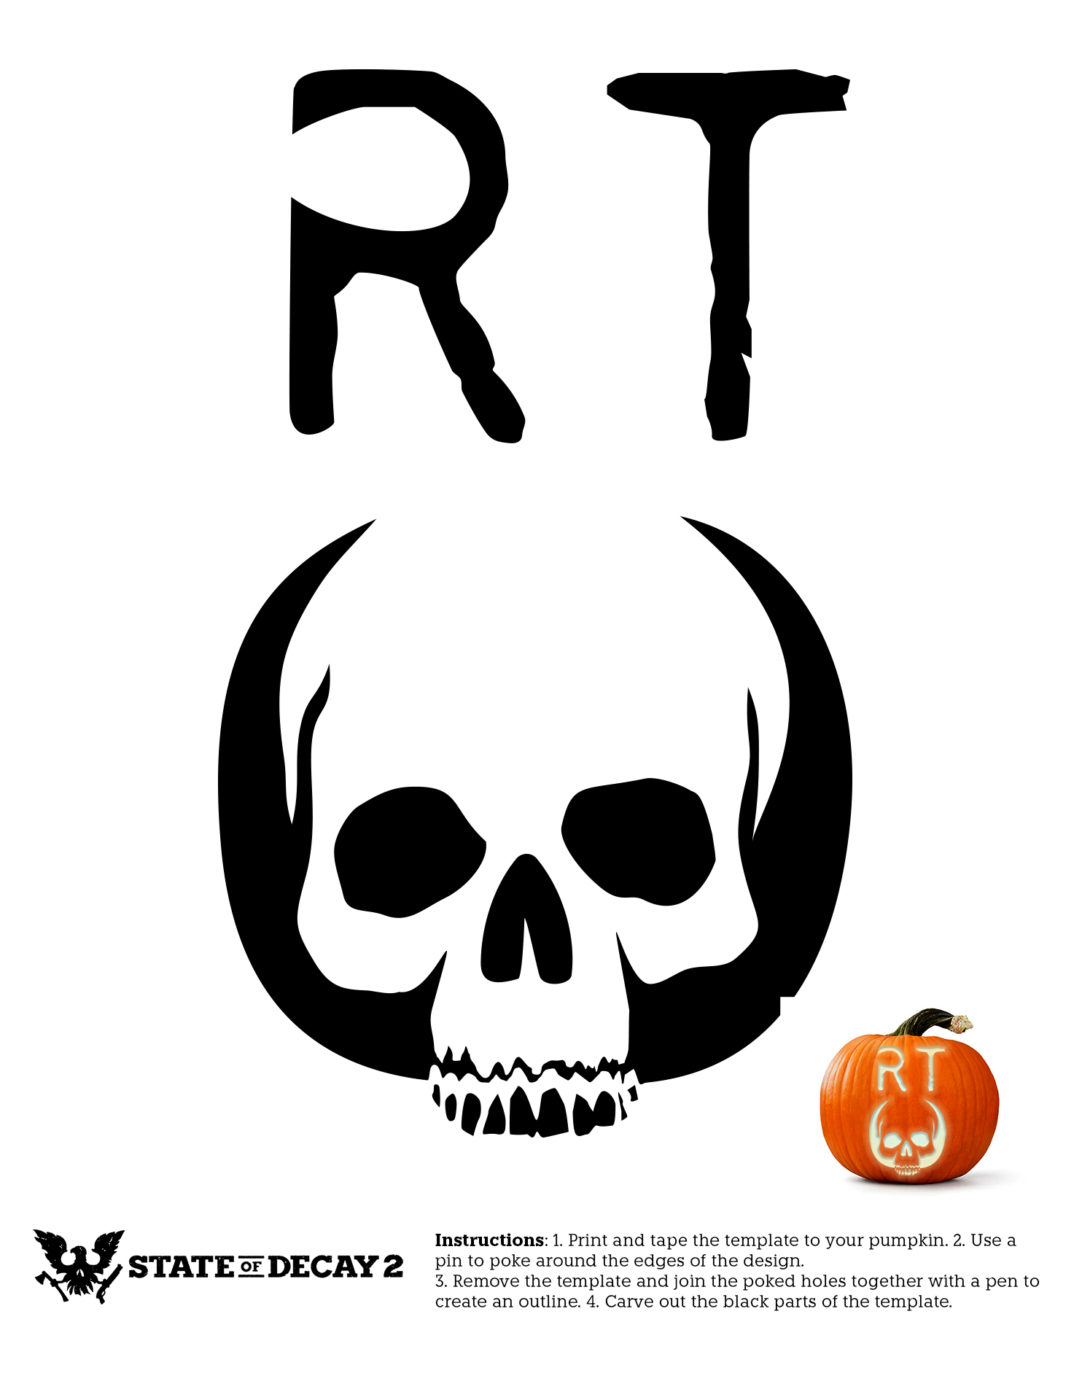 Stencil of the Red Talon skull logo with the following instructions: 1.Print and tape the template to your pumpkin. 2. Use a pin to poke around the edges of the design. 3.Remove the template and join the poked holes together with a pen to create an outline. 4. Carve the black parts of the template.